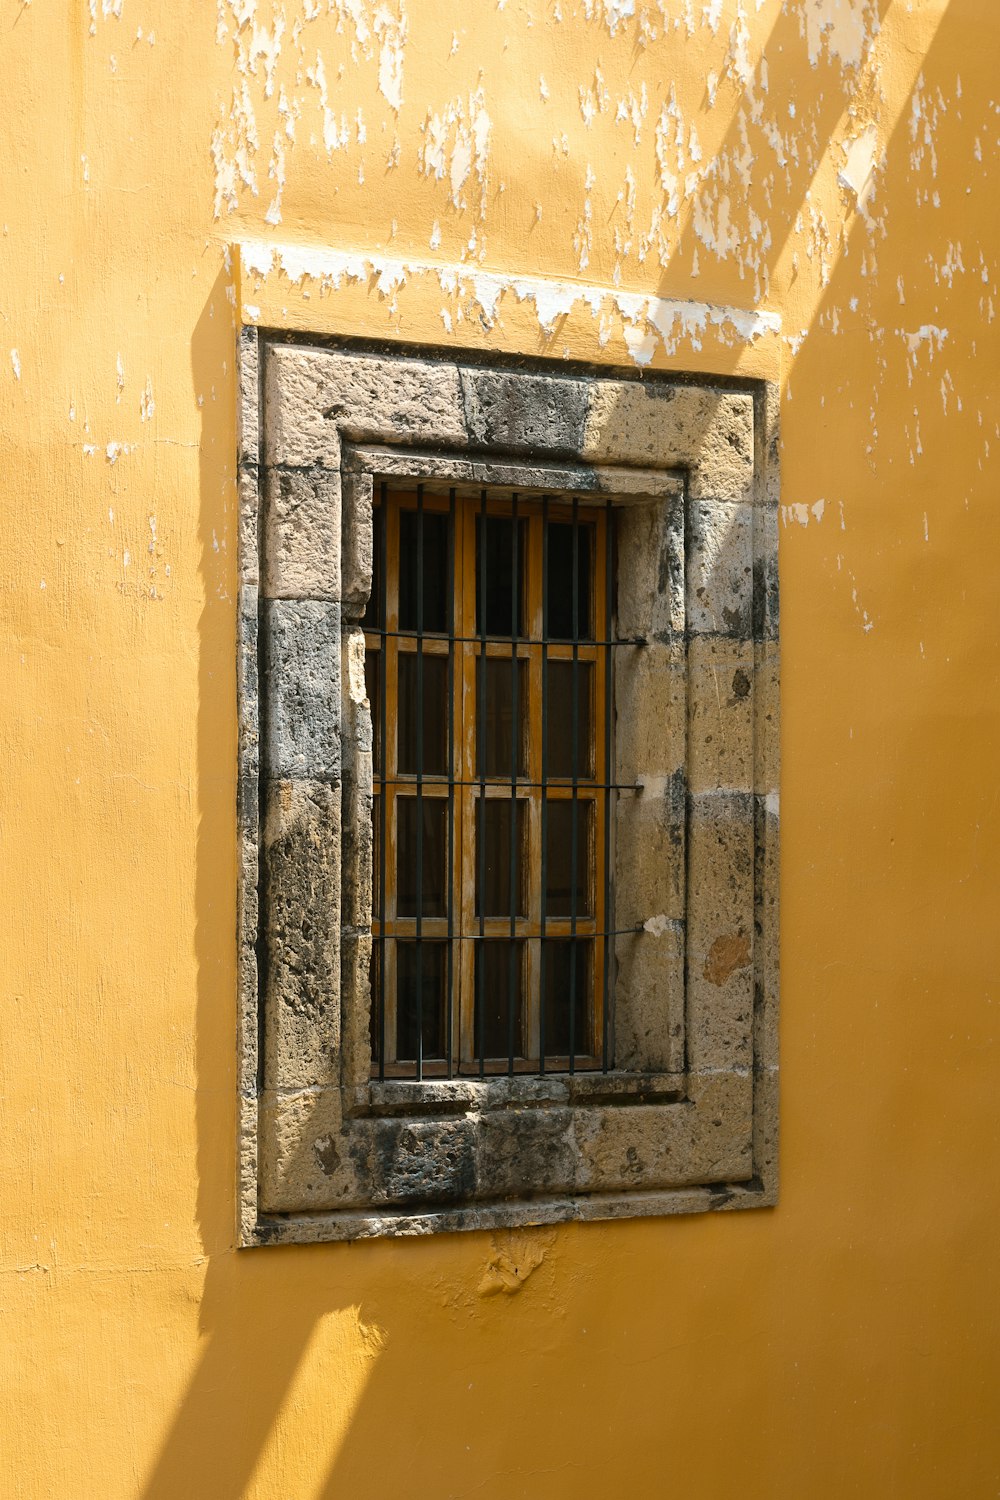 a window in a building